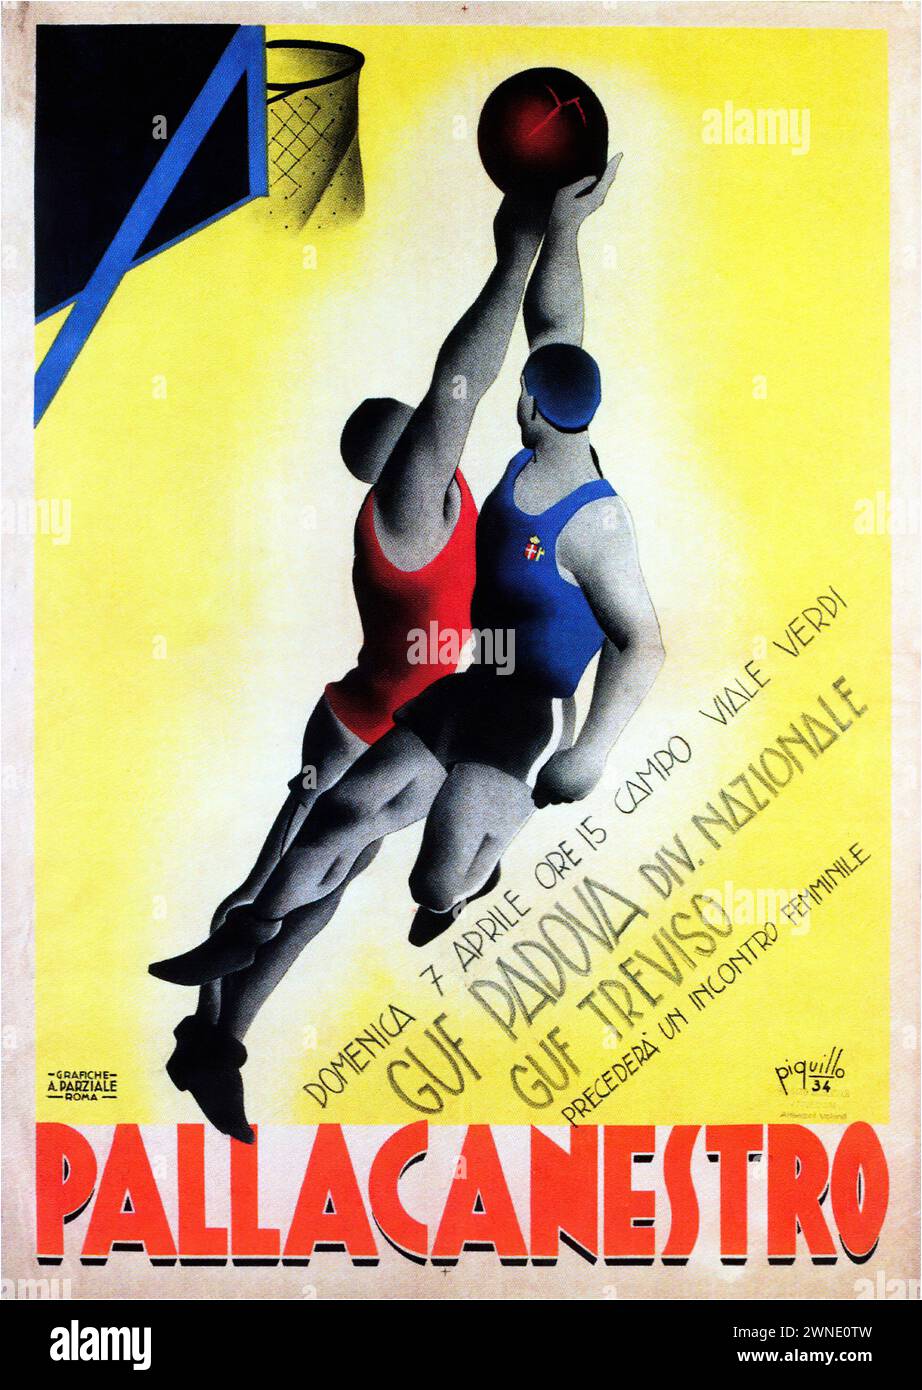 'PALLACANESTRO' ['BASKETBALL'] Vintage Italian Advertising poster for a basketball game featuring dynamic figures of players in action. The artwork is vibrant with a sense of movement, characteristic of sports advertisements of the time. Stock Photo